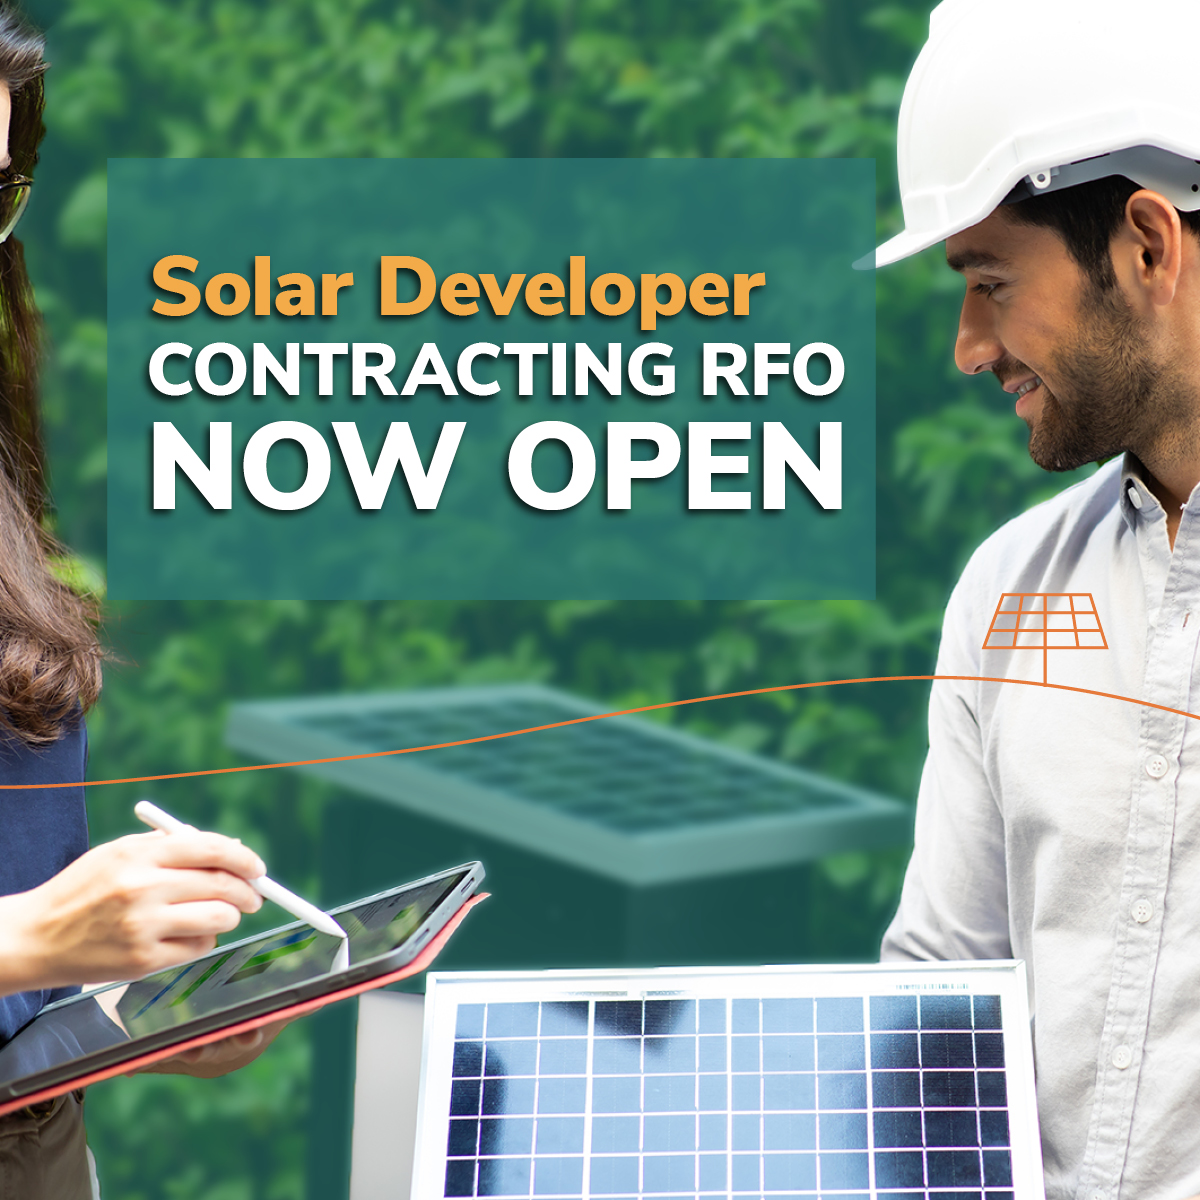 Are you a solar developer interested in helping @CleanPowerInfo provide residential customers in under-resourced communities access to renewable energy? 

Learn more about our current long-term contracting opportunities. cleanpoweralliance.org/2022-dac-gt-an…
#SolarDevelopers #CommunityBenefits